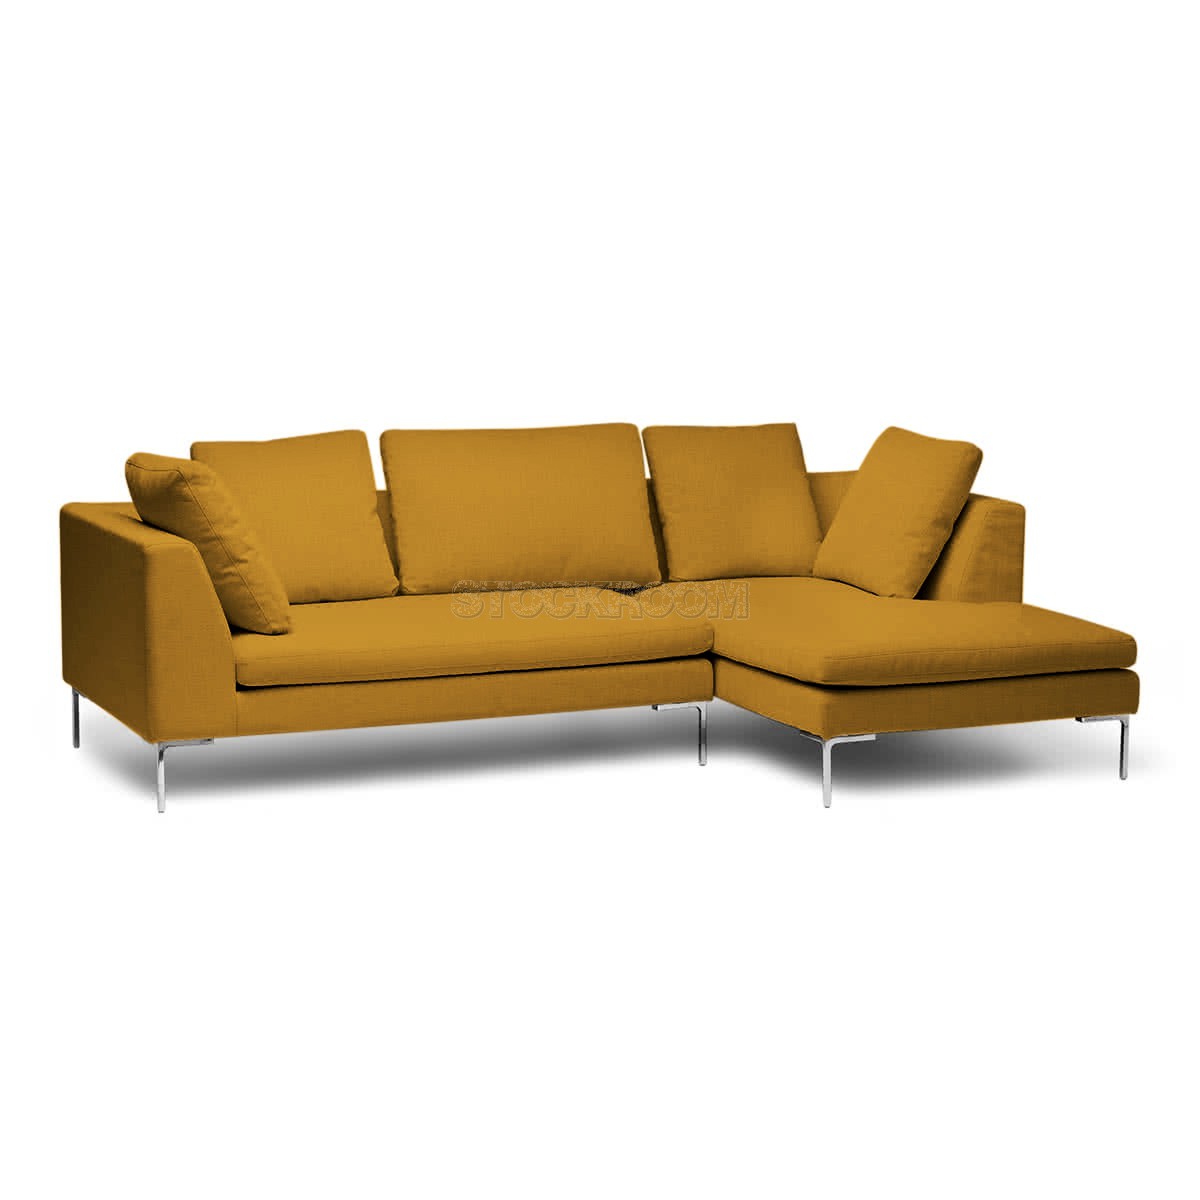 Domino Fabric Feather Down Sofa - L Shape / Sectional Sofa